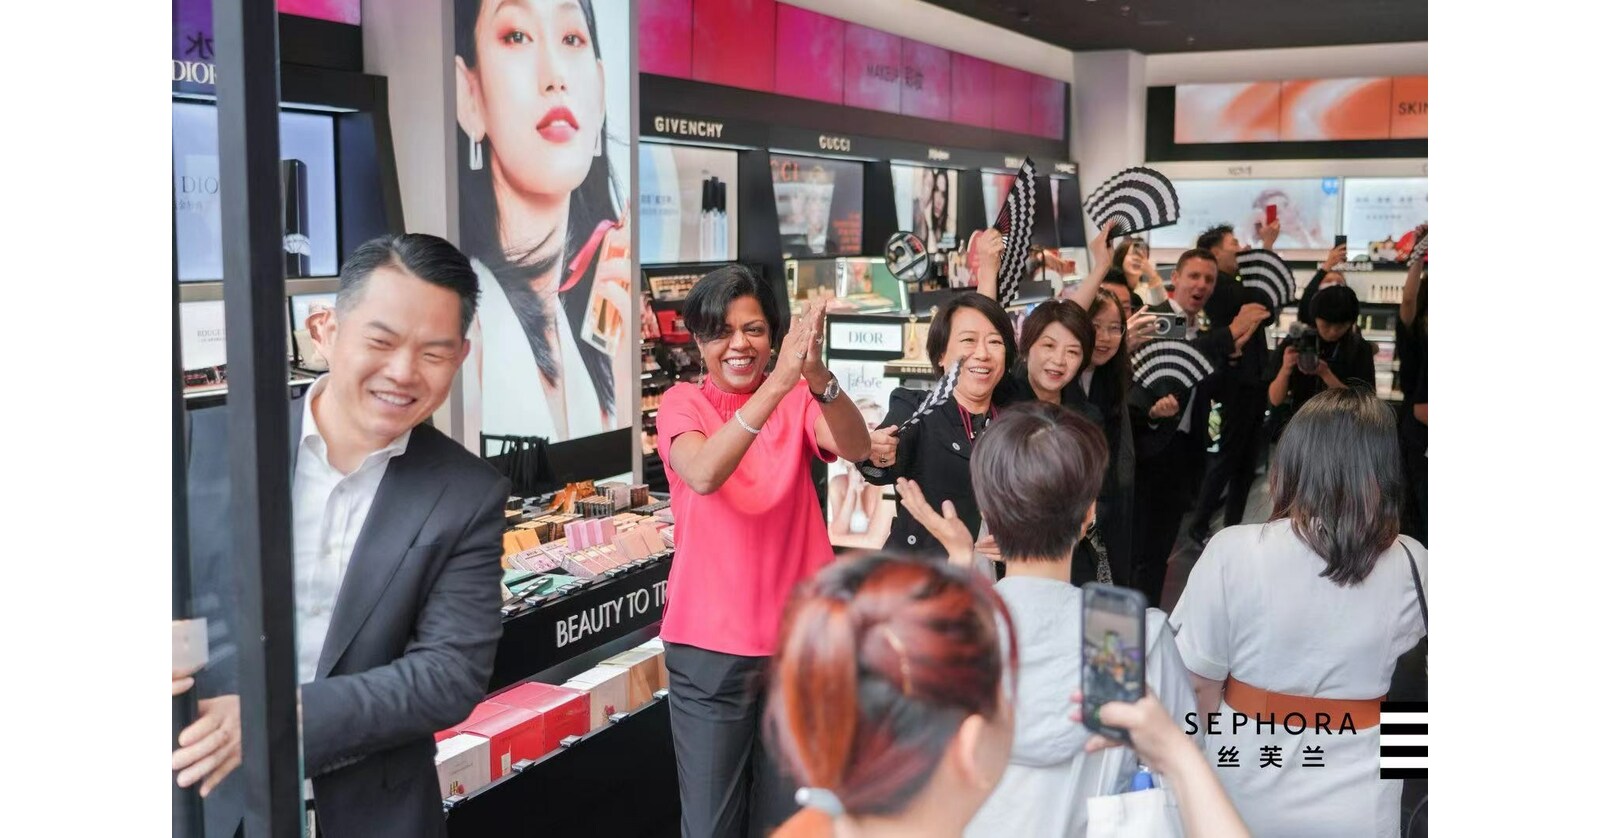 Sephora to open 100 new stores in largest expansion ever